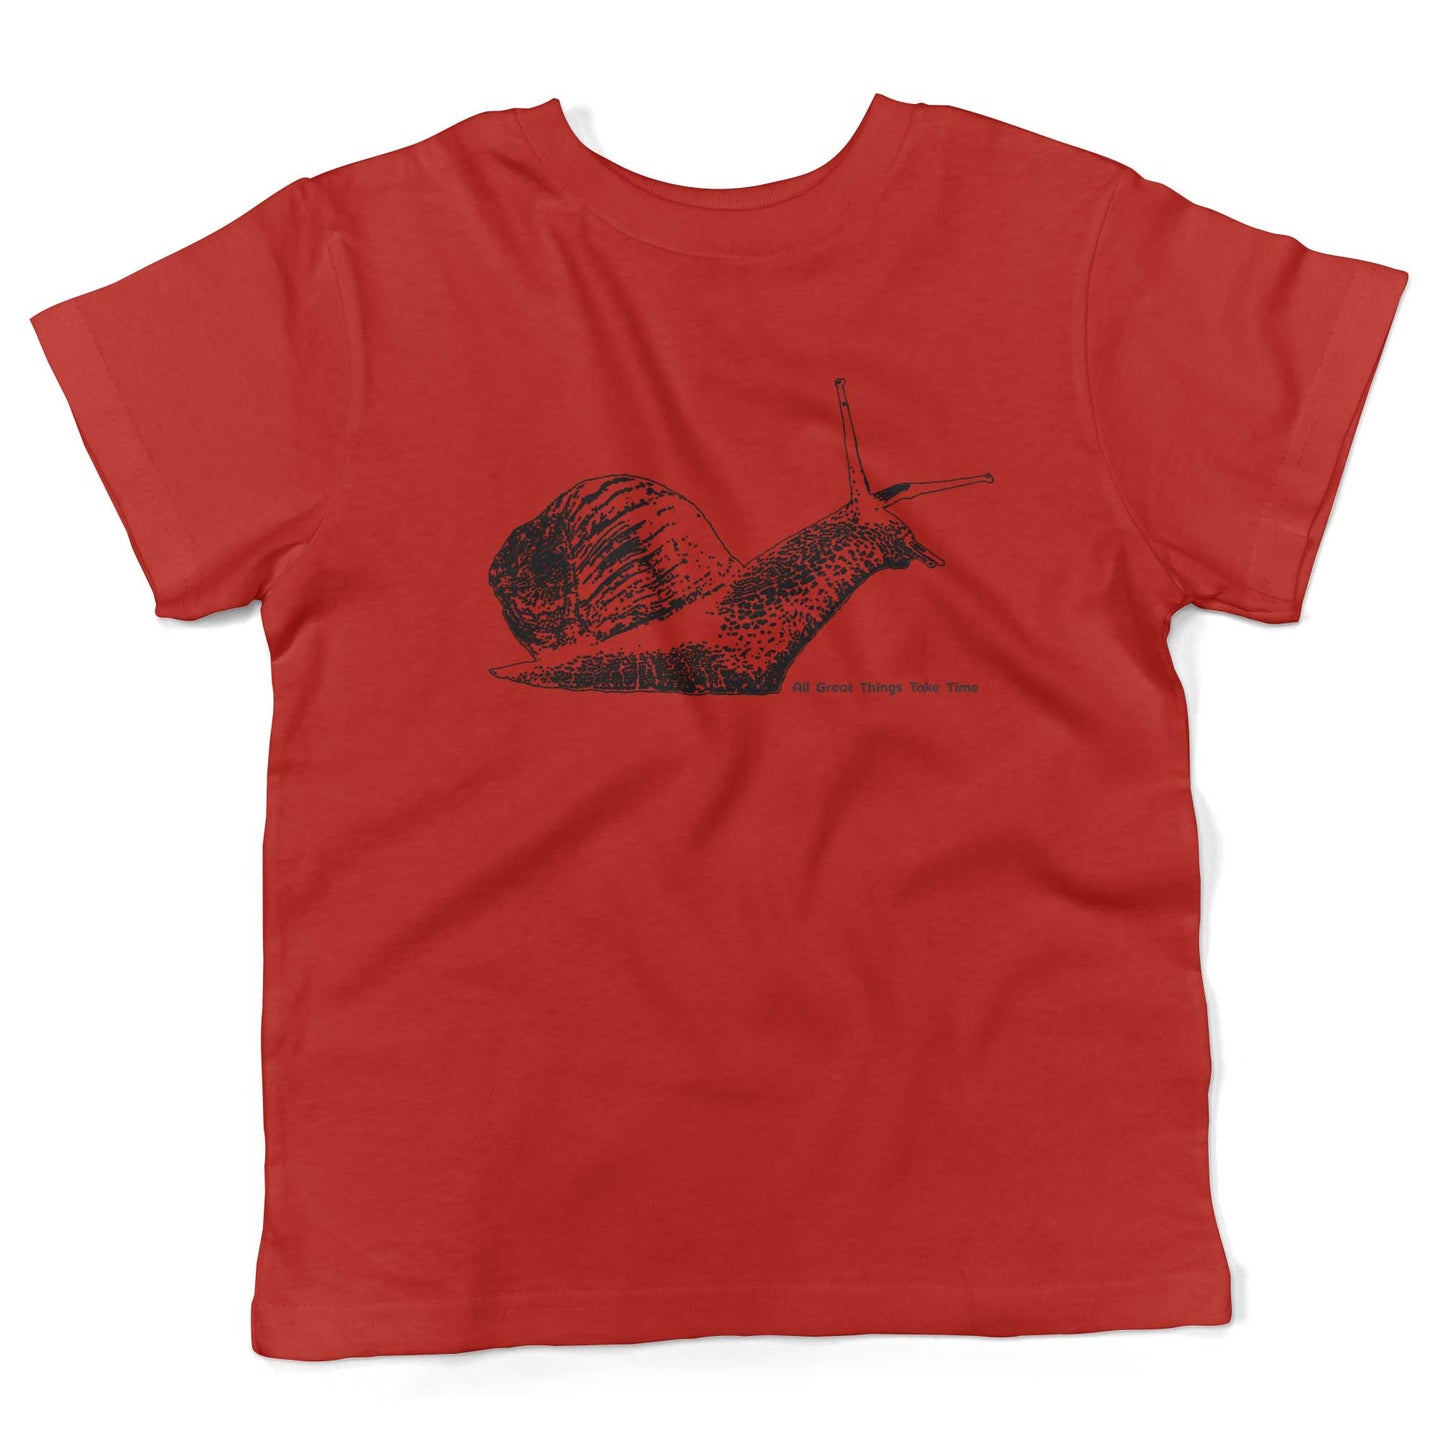 All Great Things Take Time Toddler Shirt-Red-2T